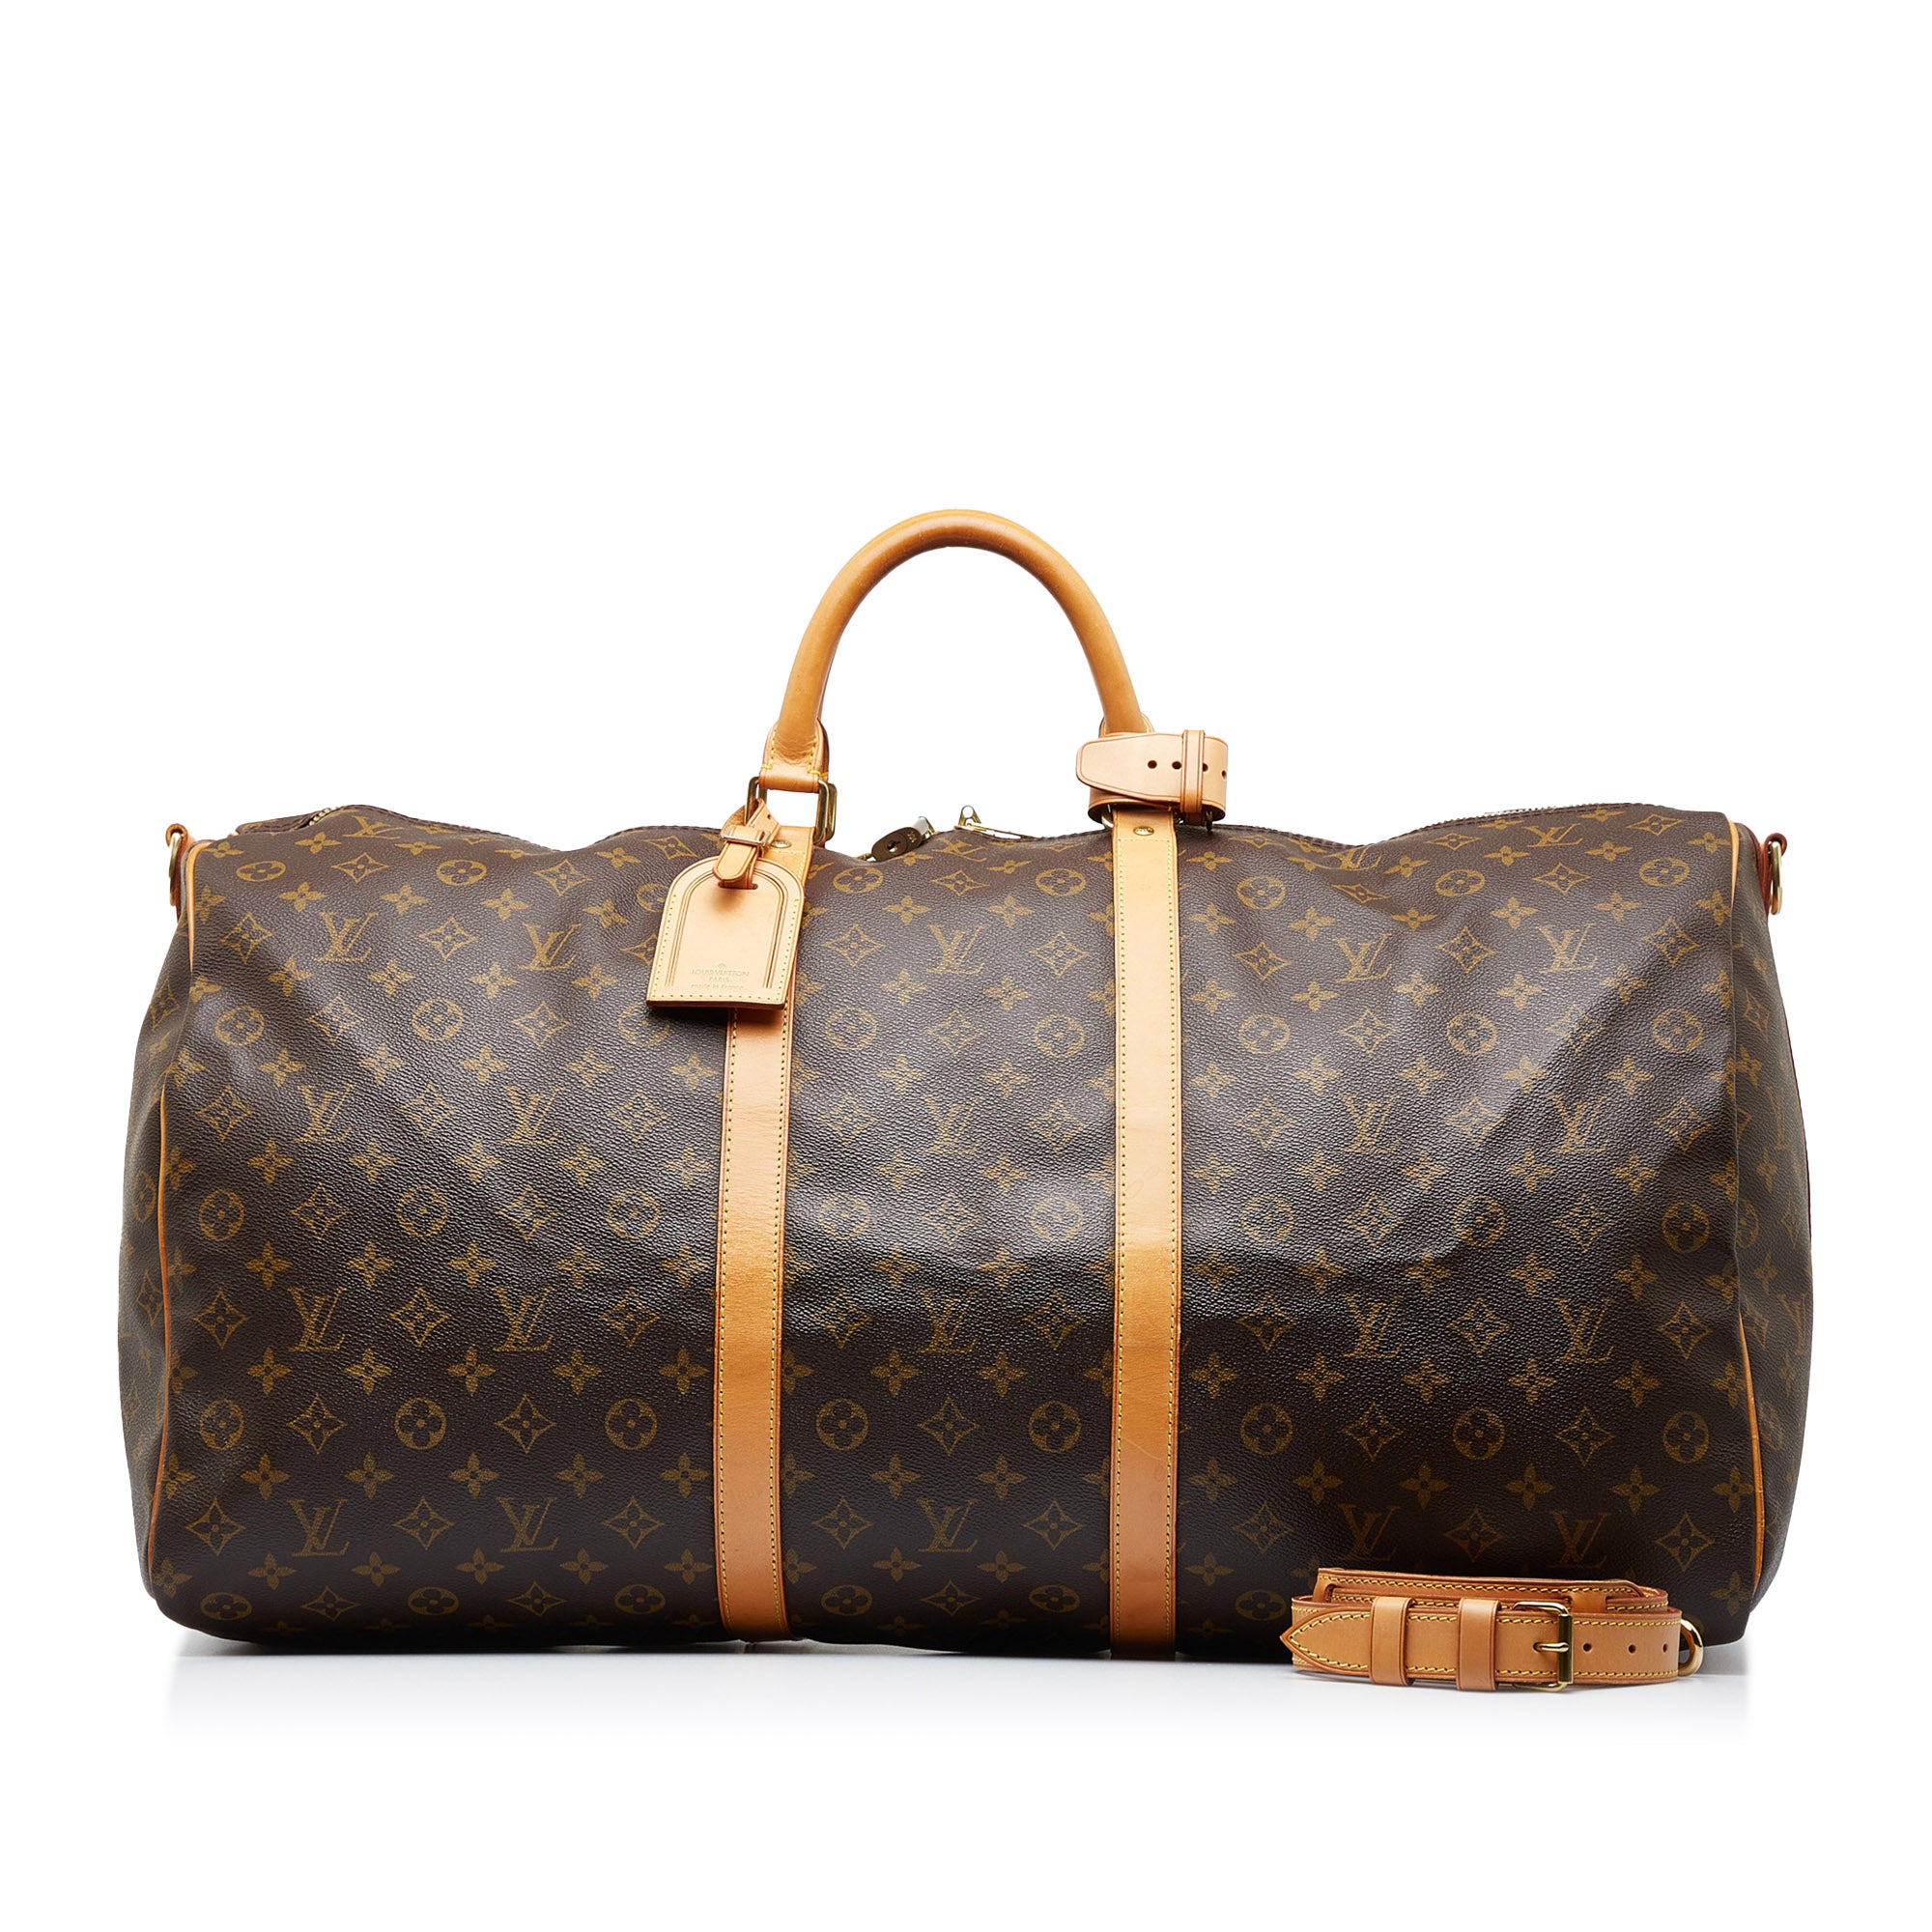 Louis Vuitton Monogram Canvas Grand Palais Tote - Handbag | Pre-owned & Certified | used Second Hand | Unisex